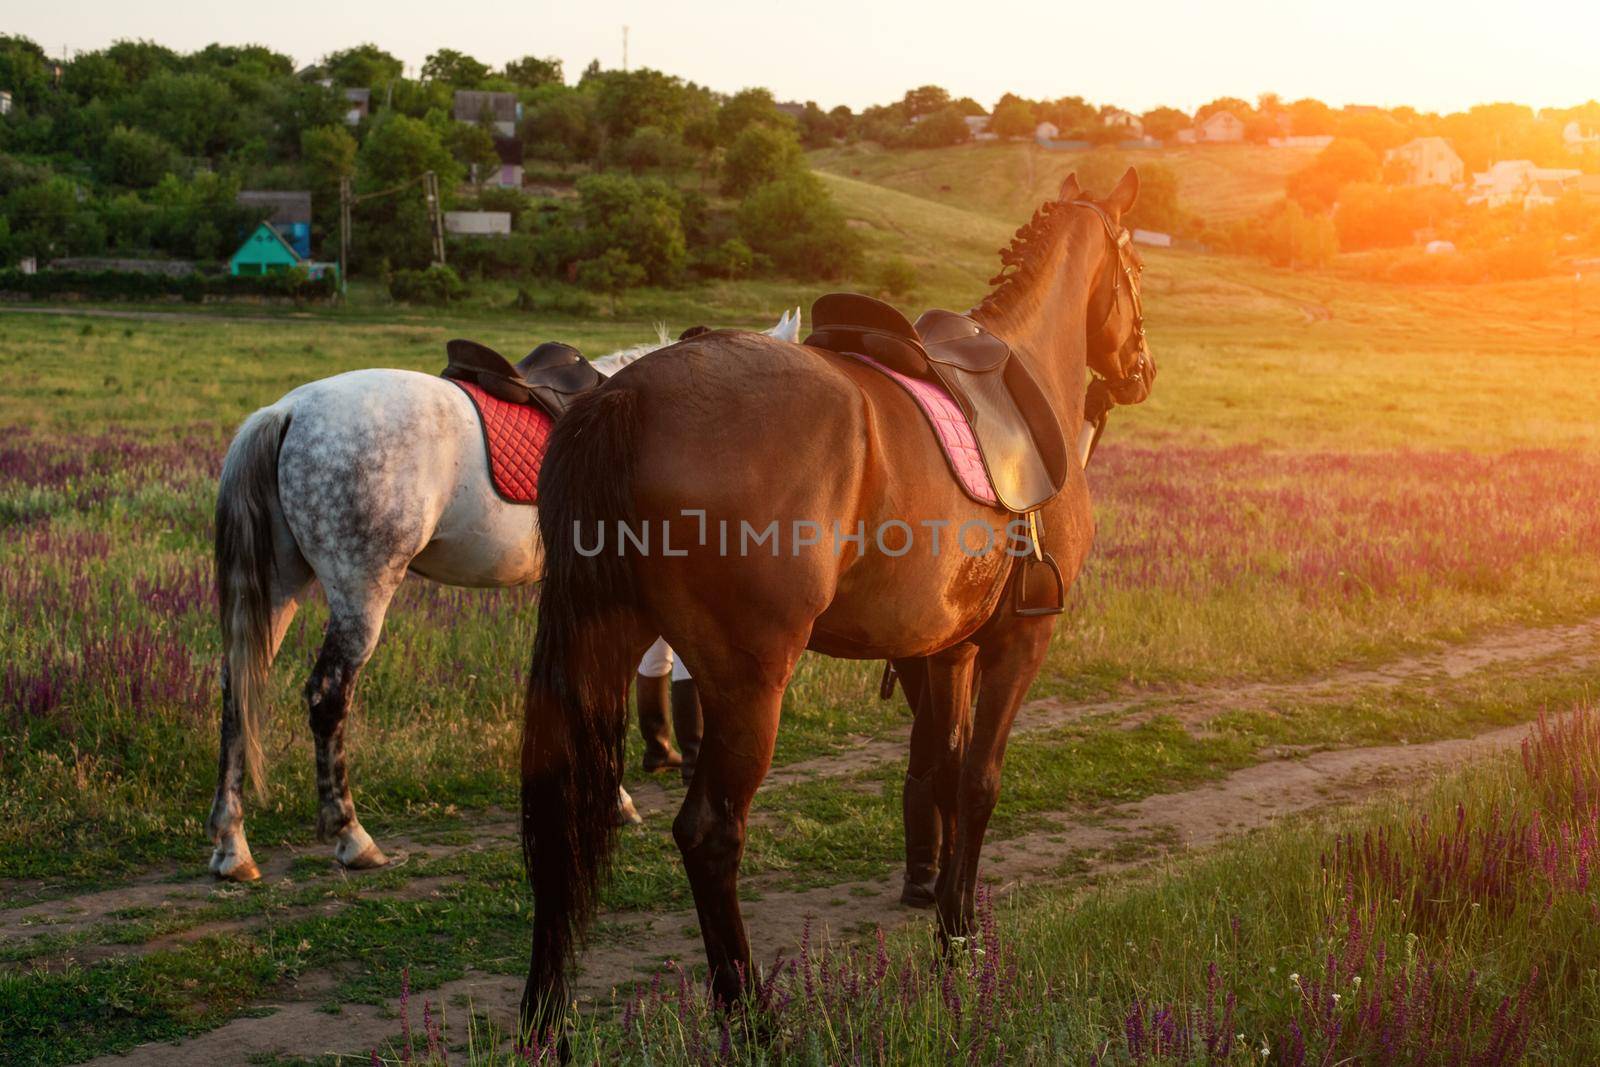 Two horses outdoor in summer happy sunset together nature. Taking care of animals, love and friendship concept.